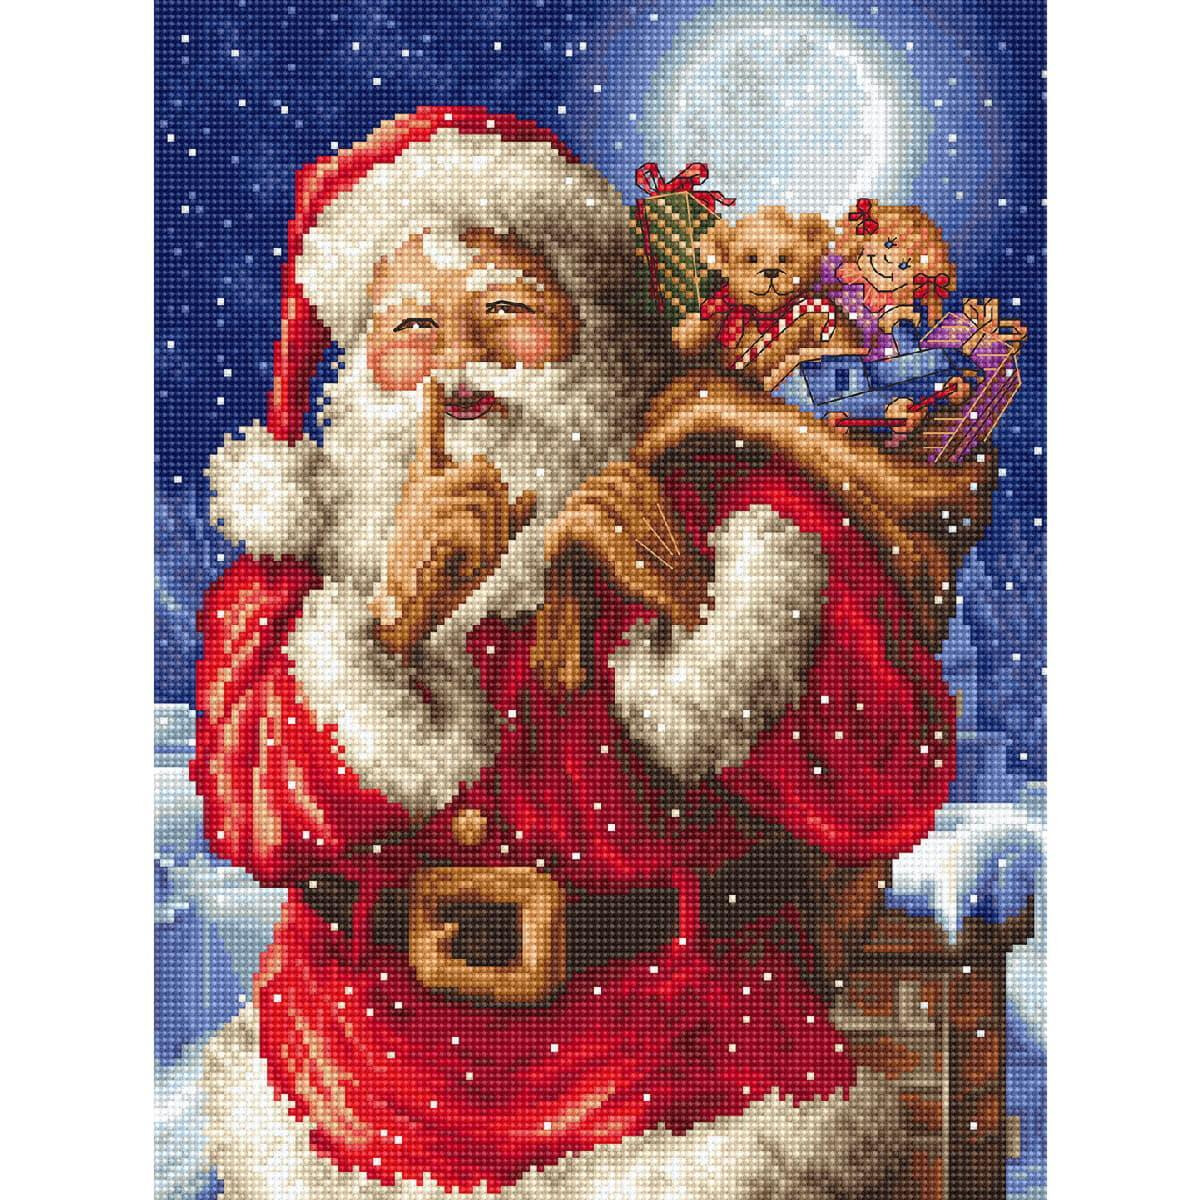 One painting shows Santa Claus, dressed in his iconic red...